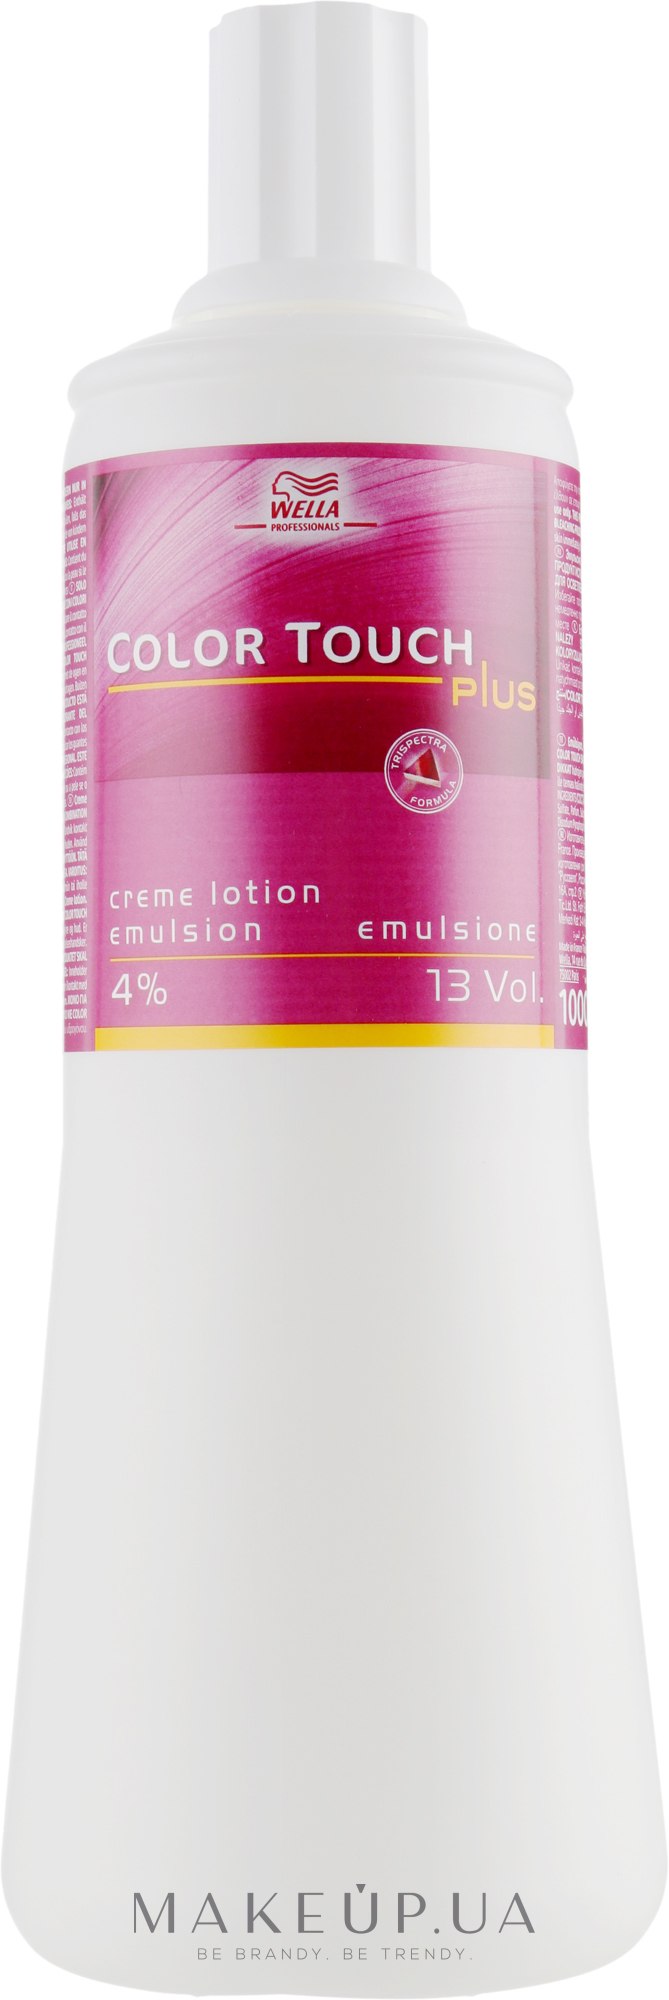 Емульсія для фарби Color Touch Plus - Wella Professional Color Touch Plus Emulsion 4% — фото 1000ml